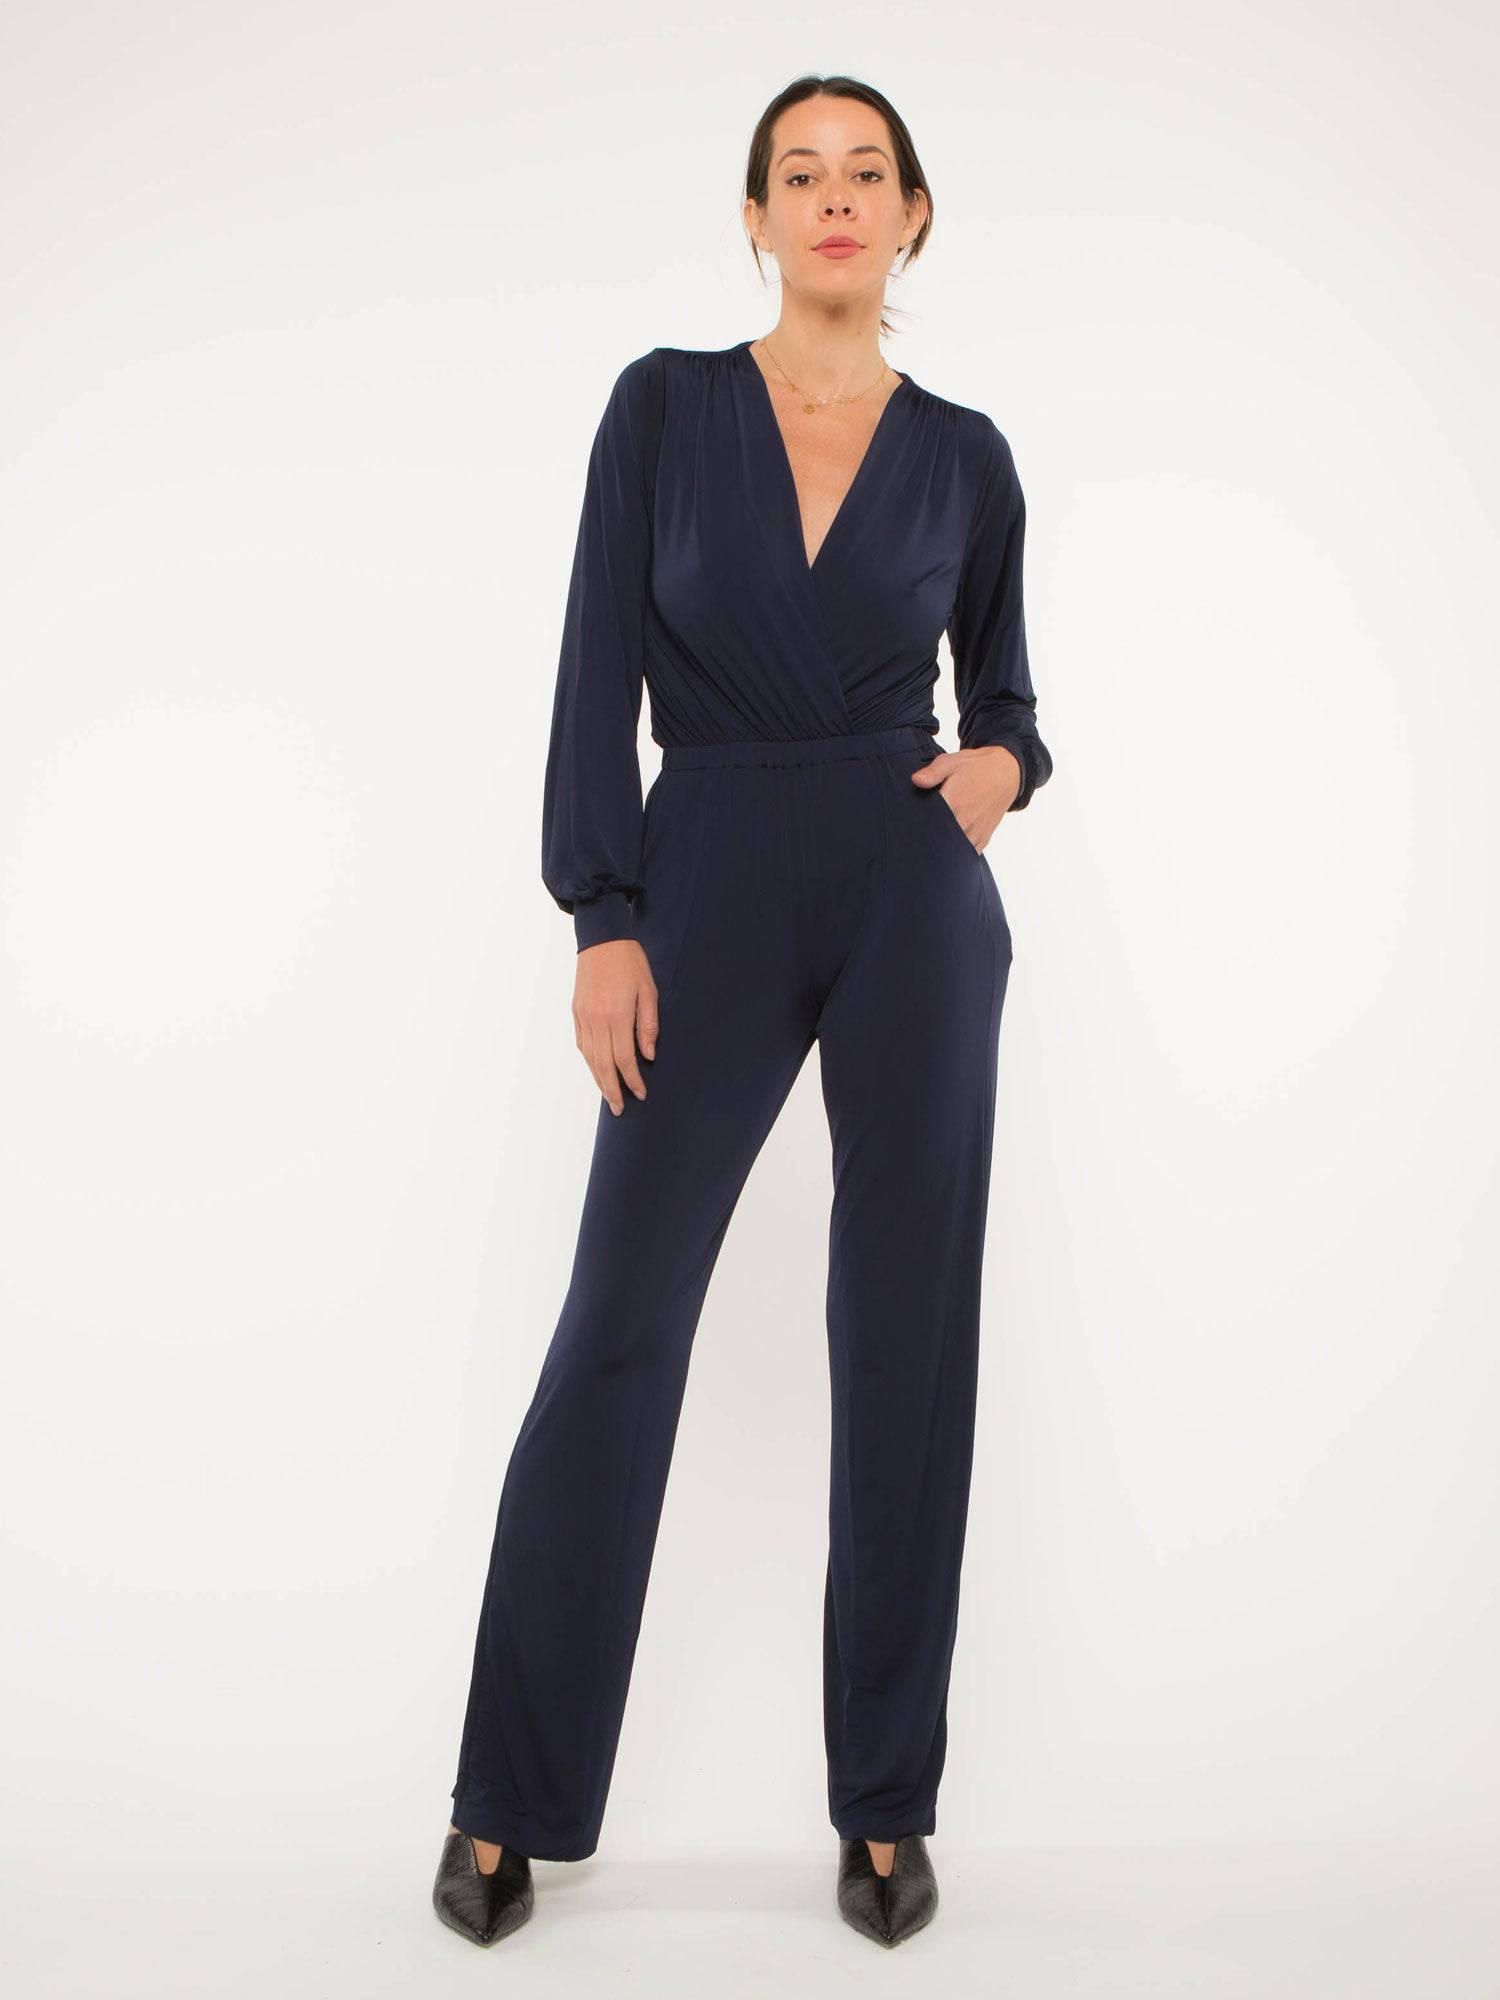 Juicy By Juicy Couture Long Sleeve Jumpsuit - JCPenney